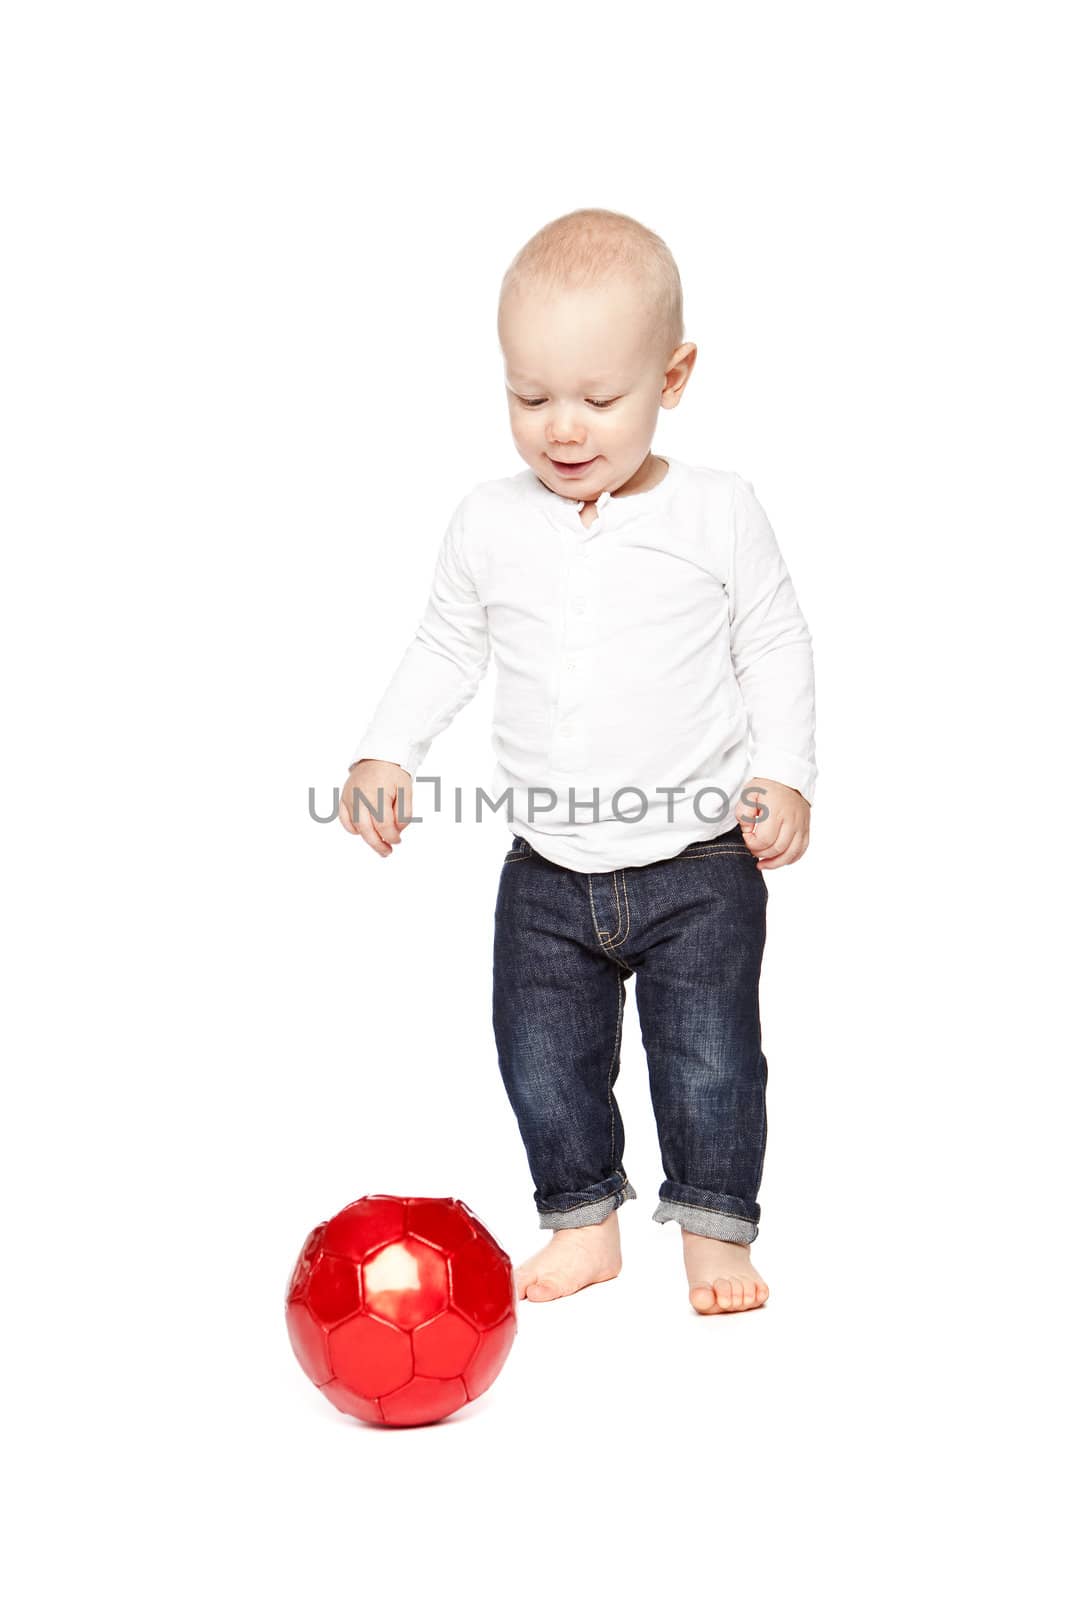 Boy playing with a red ball isolated against a white background